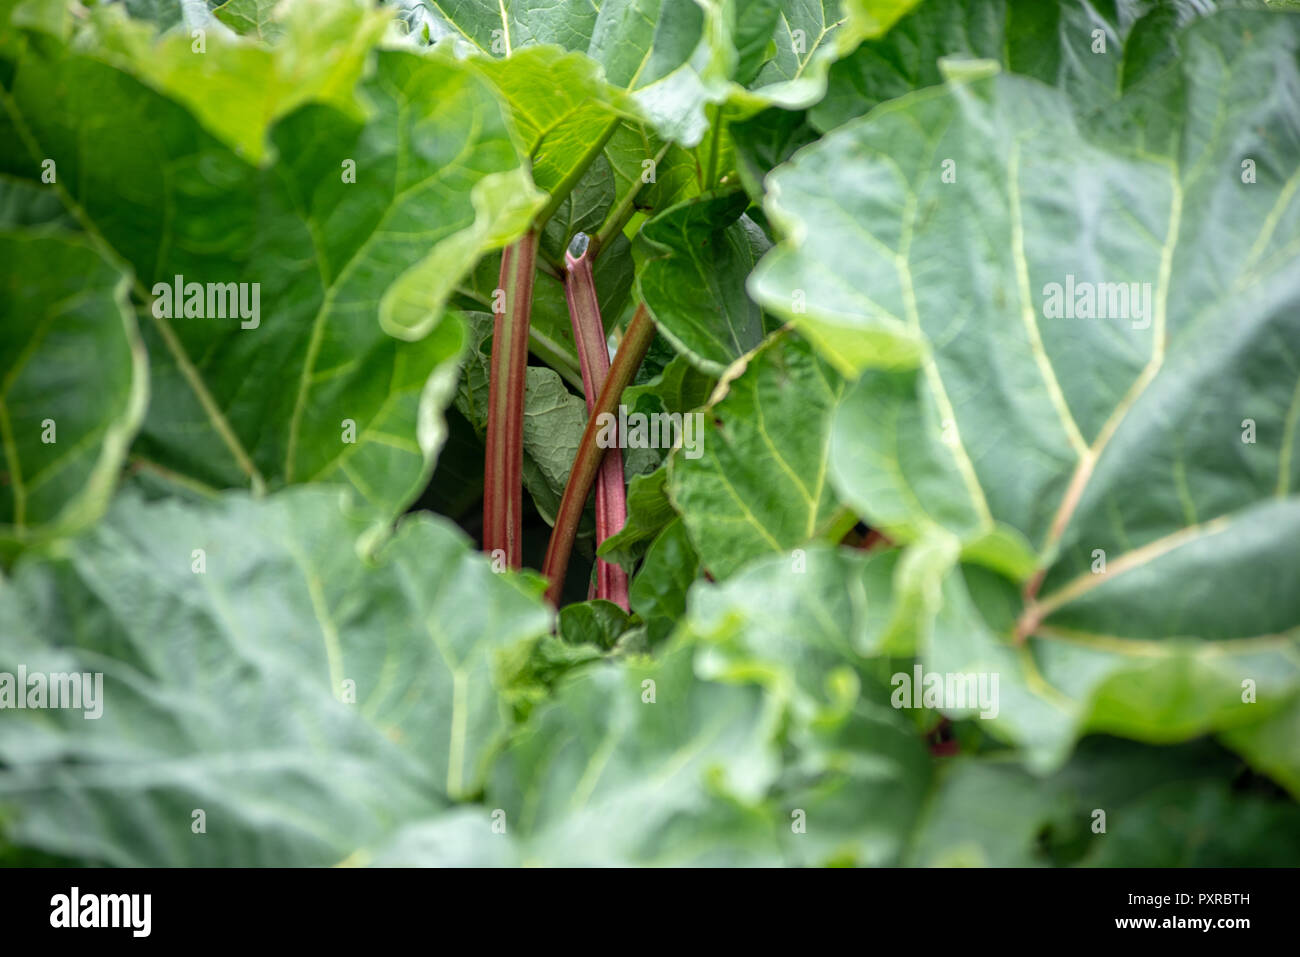 Red leaf stalks of the rhubarb plant (Rheum rhabarbarum) appear from under the coverage of its leaves,  Zwoleń, Masovian Voivodeship, Poland Stock Photo